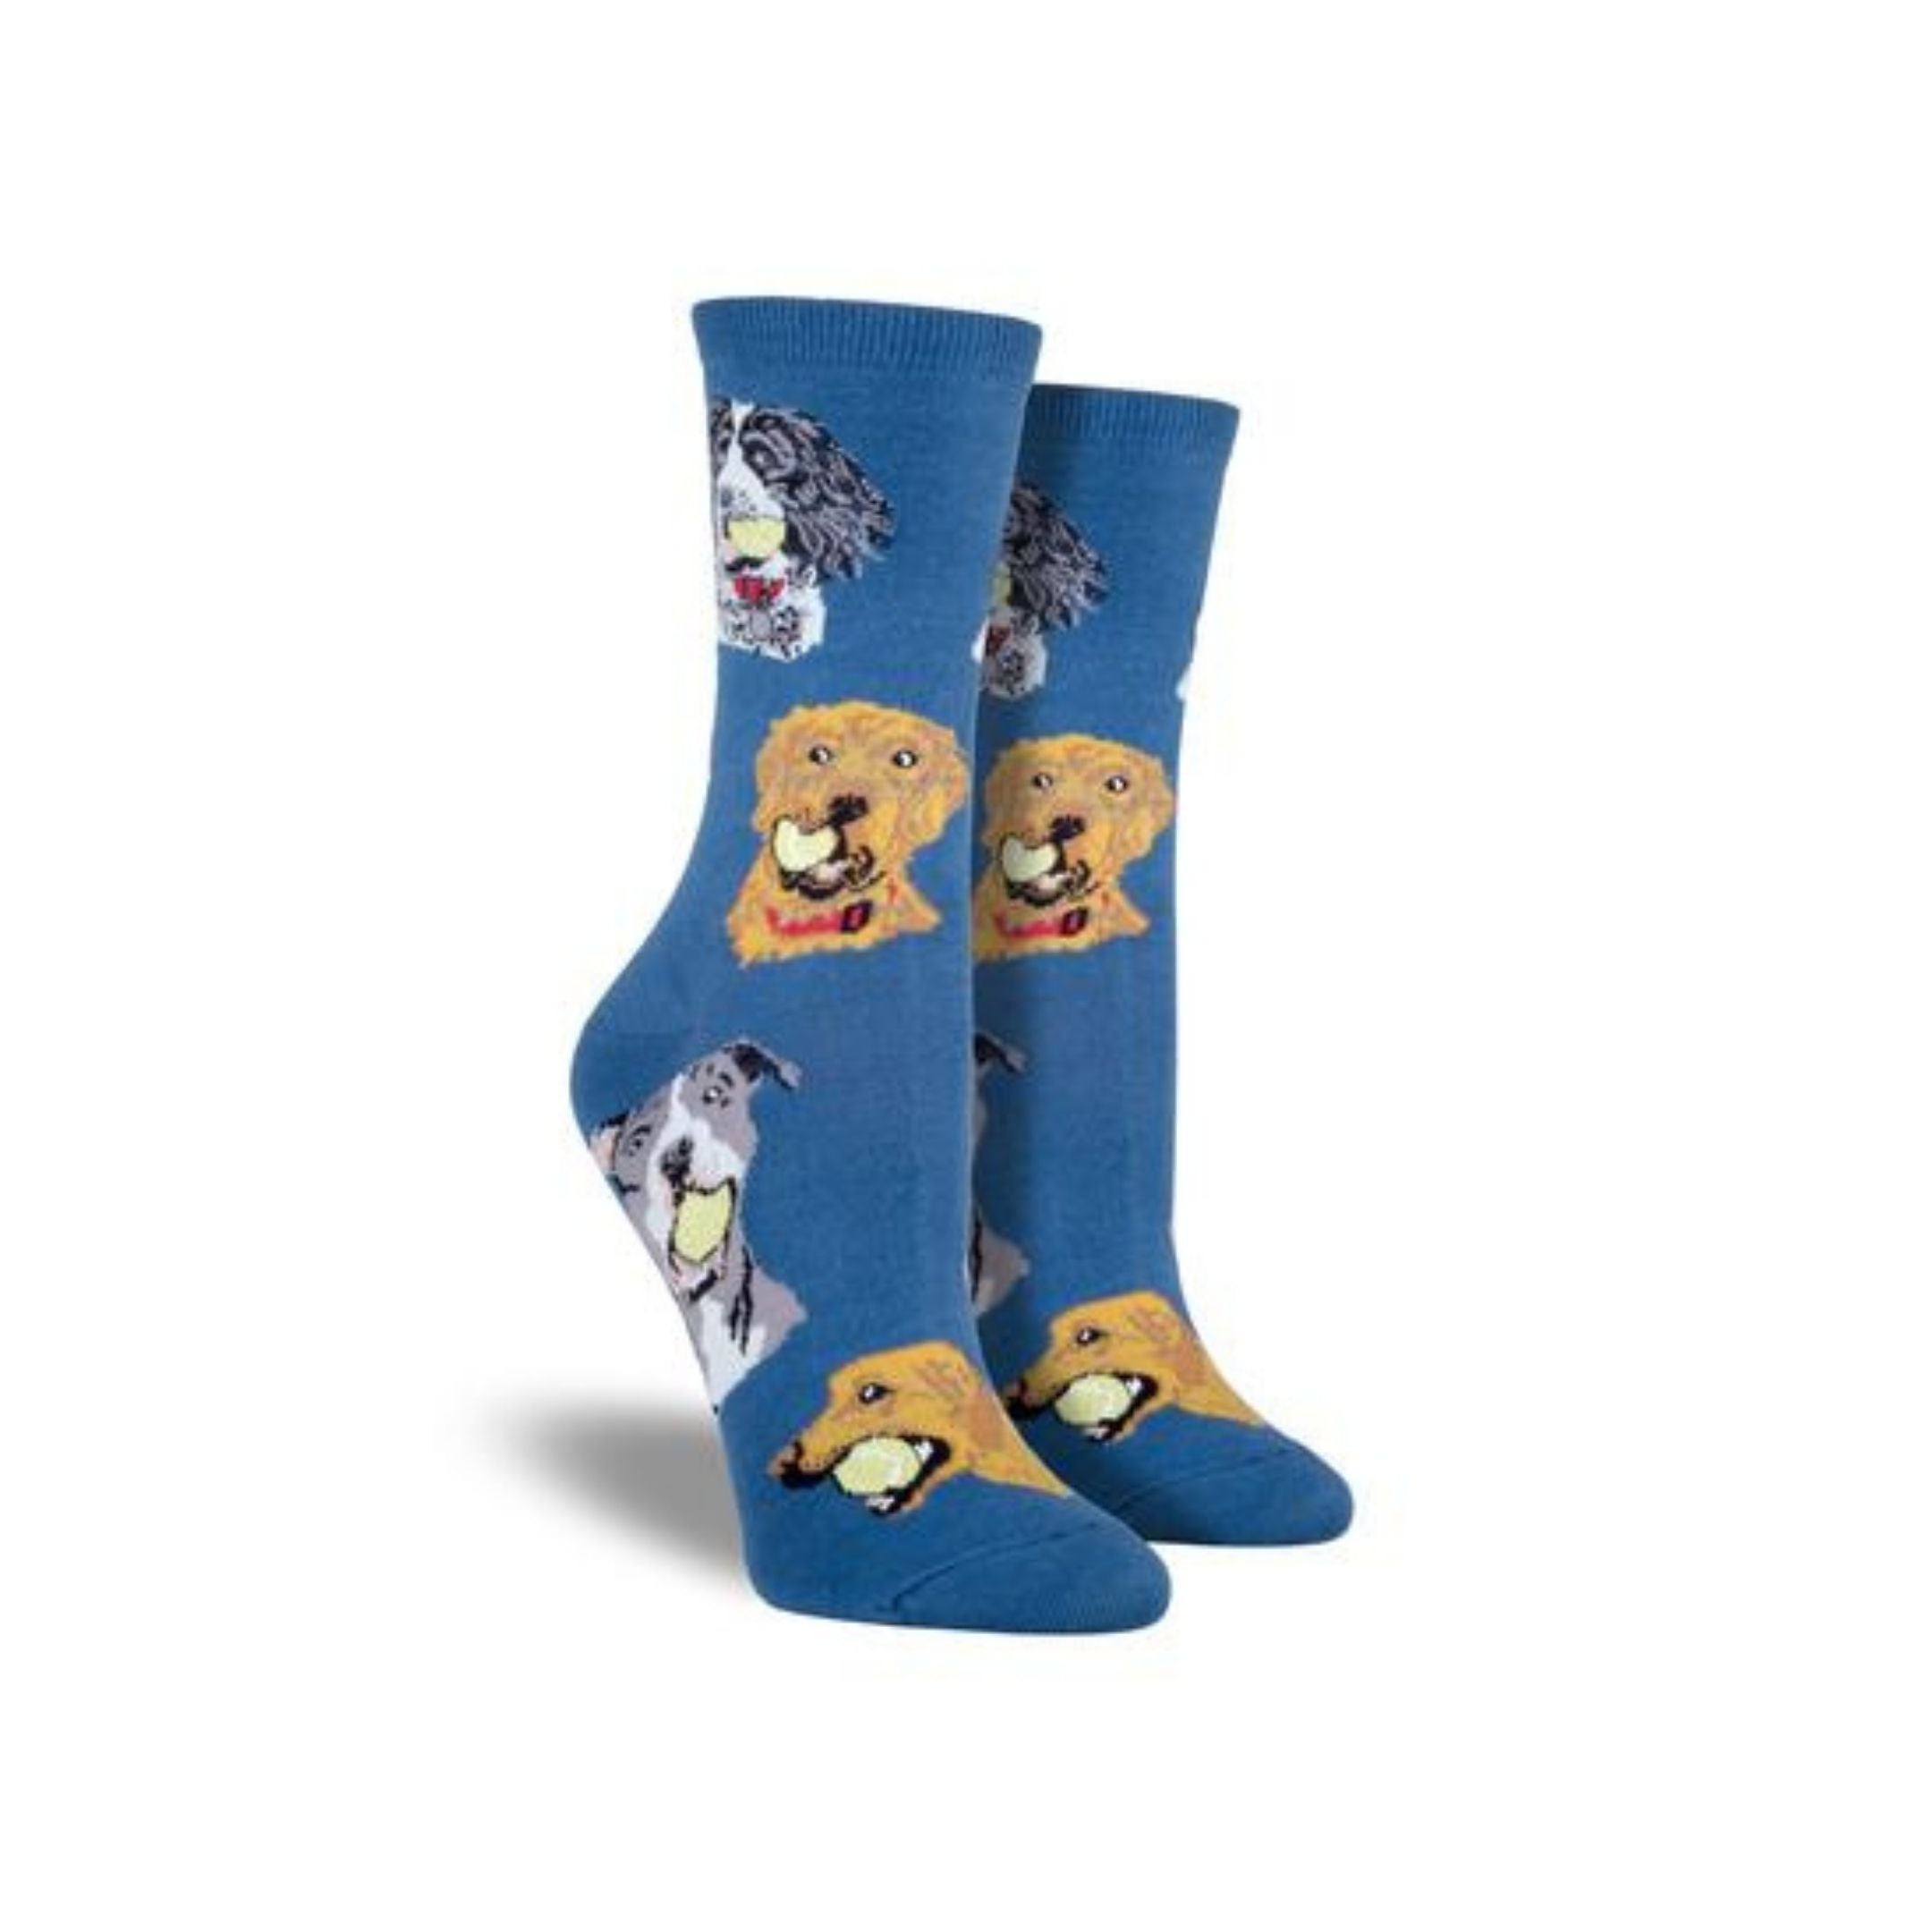 light blue socks with dogs holding a ball